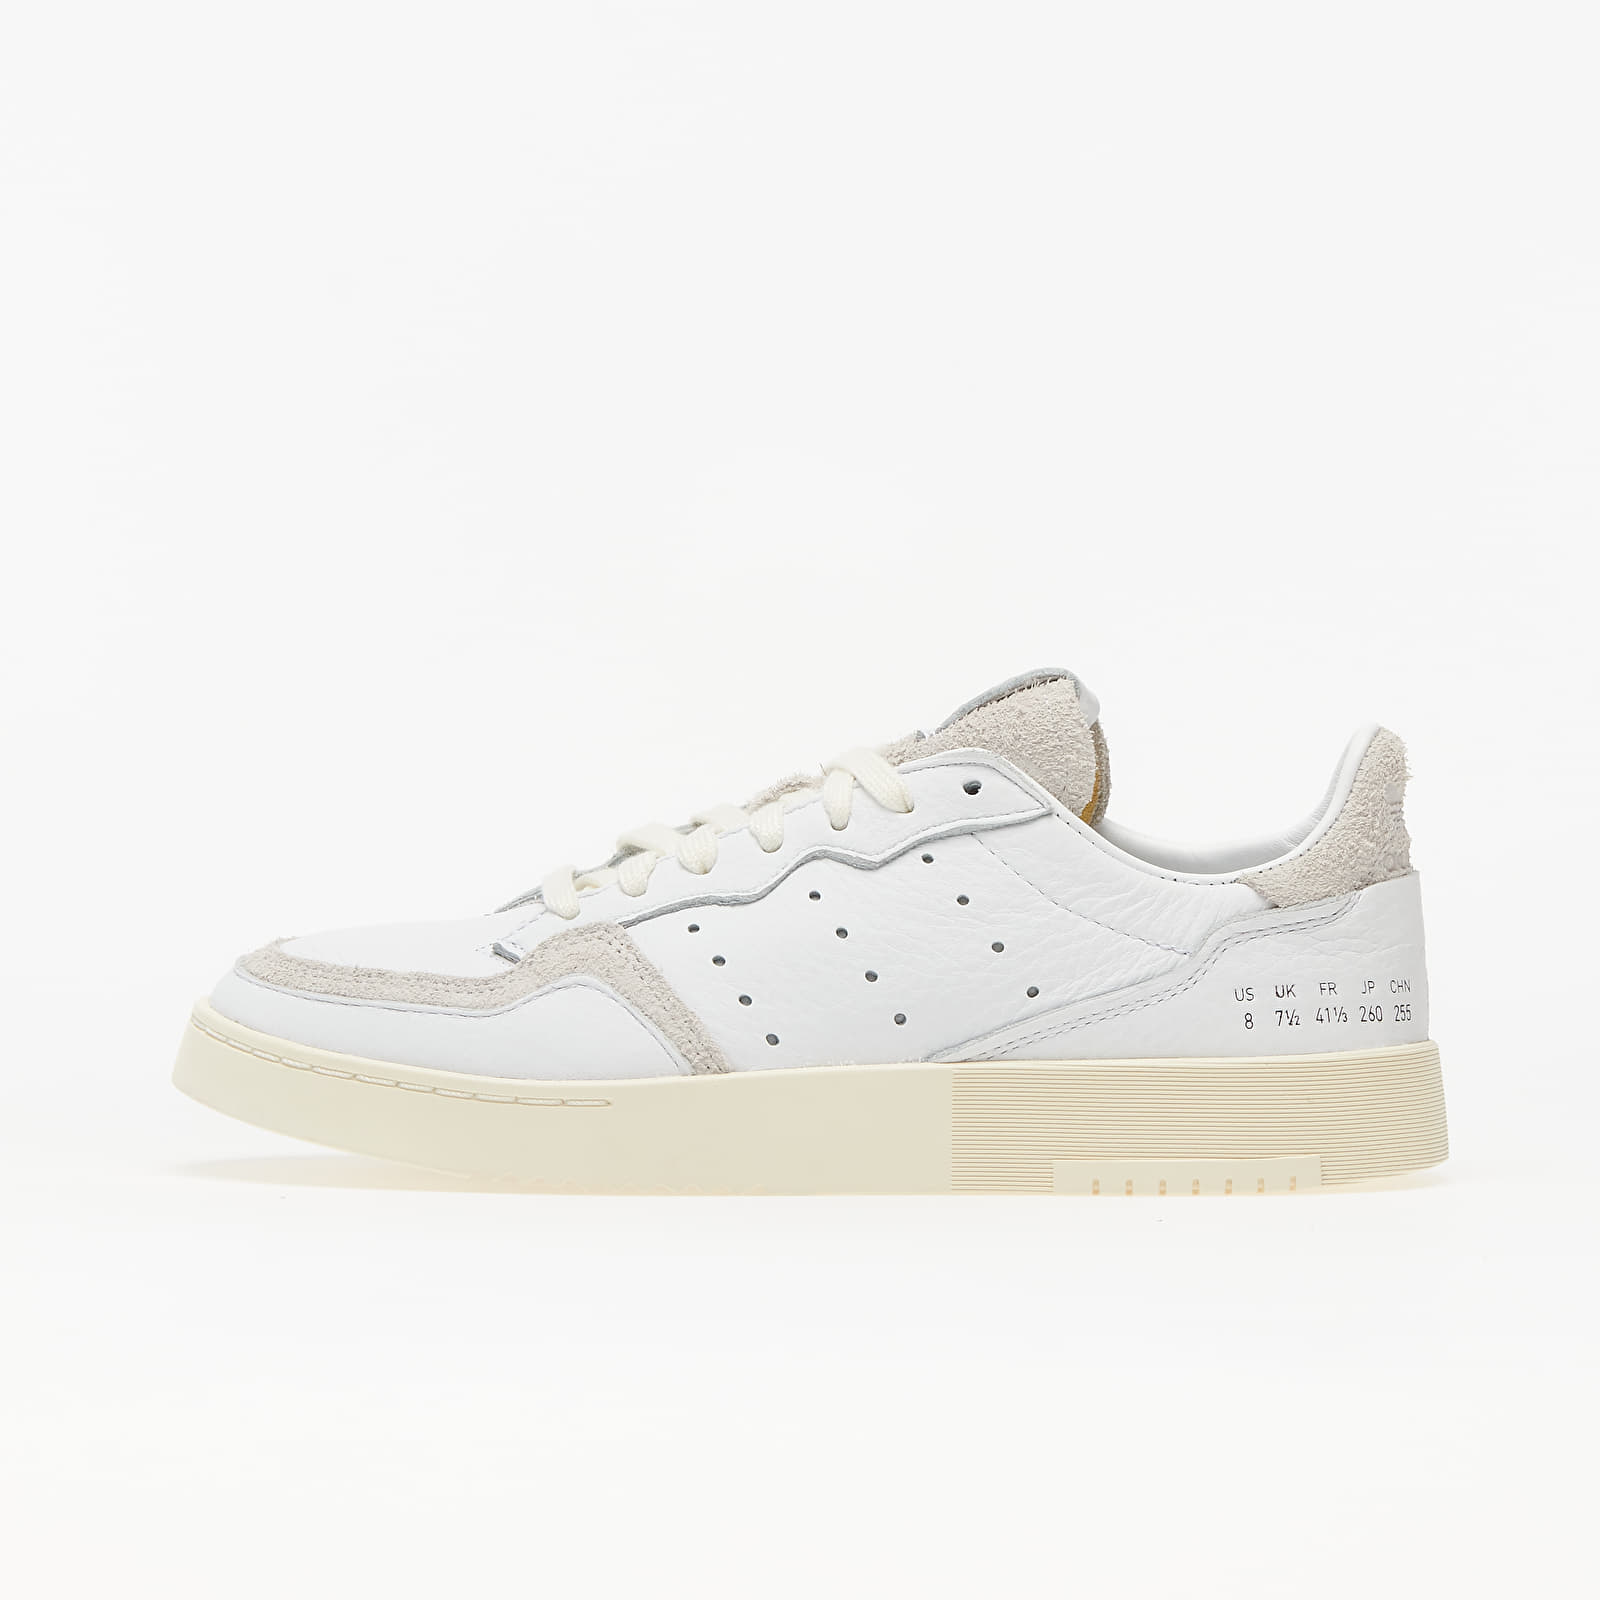 adidas Supercourt Ftw White/ Crystal White/ Off White FY0039